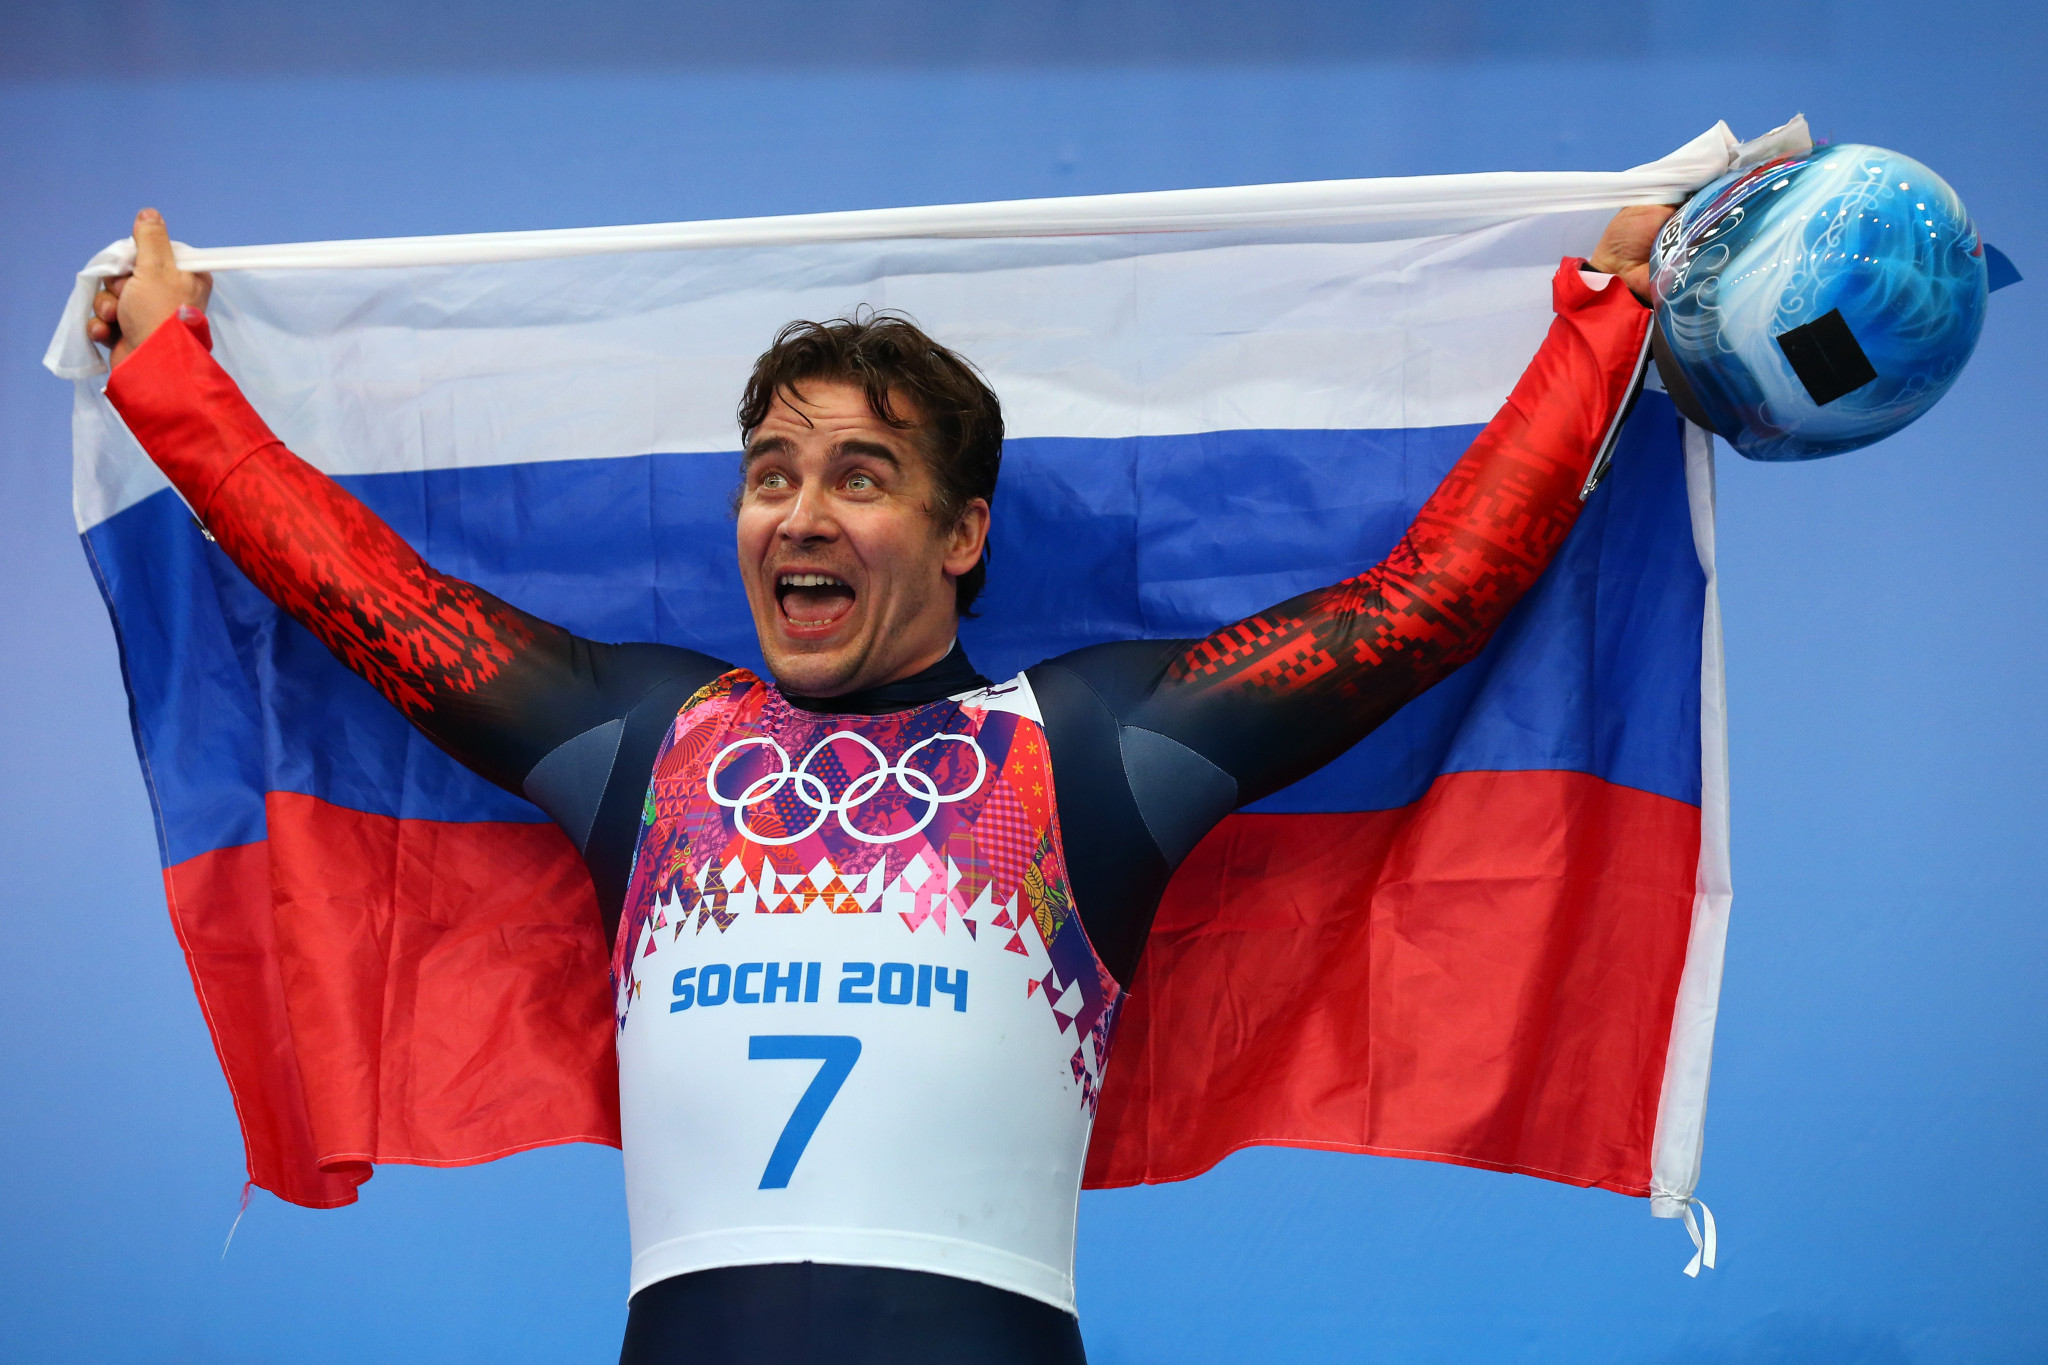 Albert Demchenko won men’s singles silver in the luge for Russia at Sochi 2014 ©Getty Images